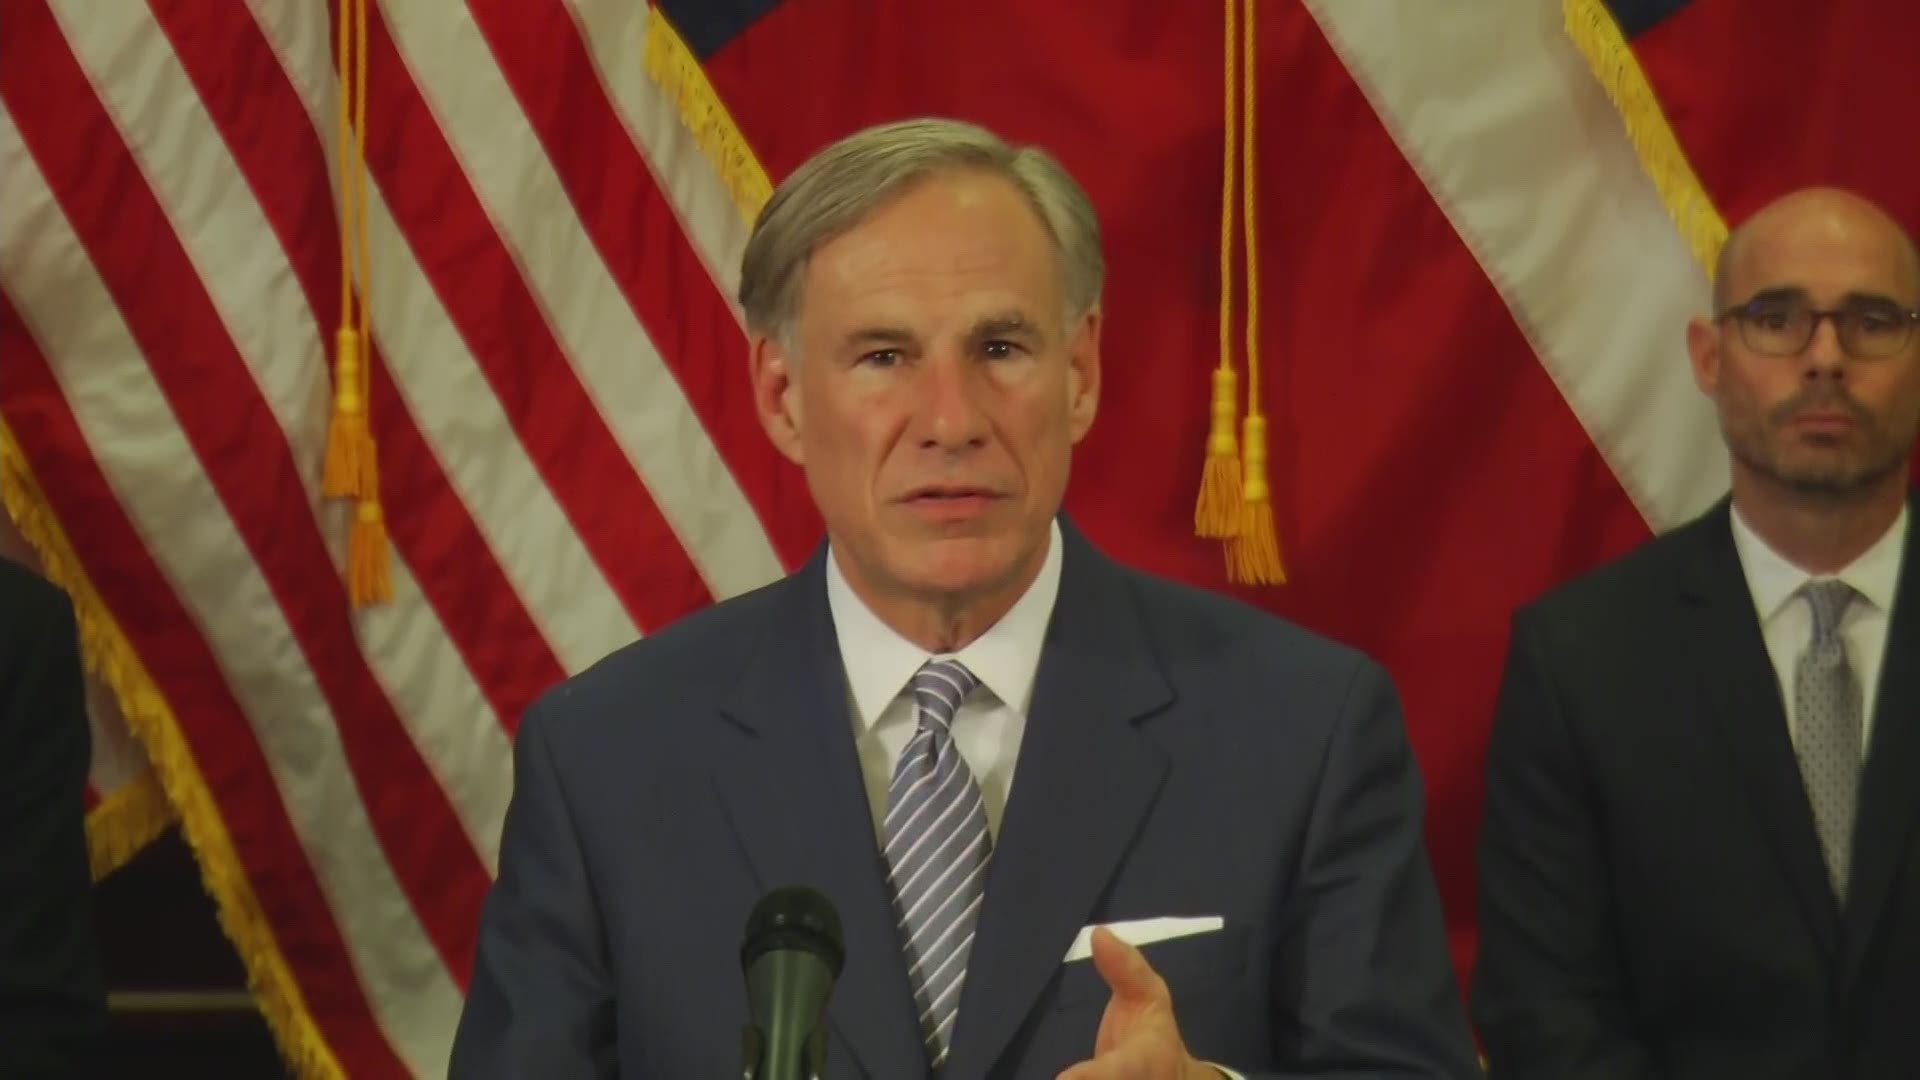 Gov. Greg Abbott says we must be guided by data and doctors, and put health and safety first as the state economy gets restarted.